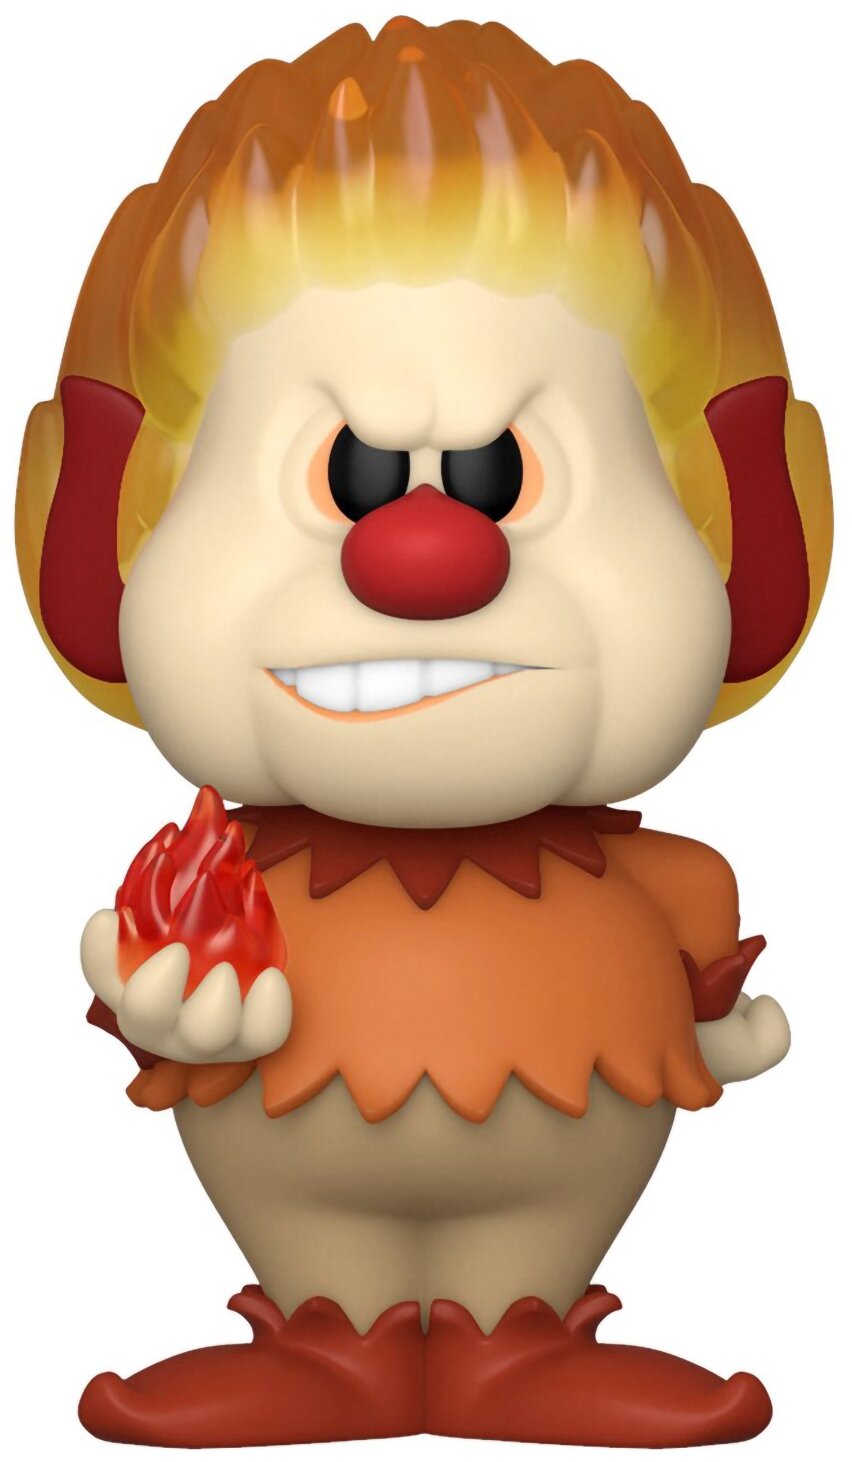 Фигурка Funko Vinyl Soda The Year Without a Santa Claus Heat Miser With Chase 58722, 10 см